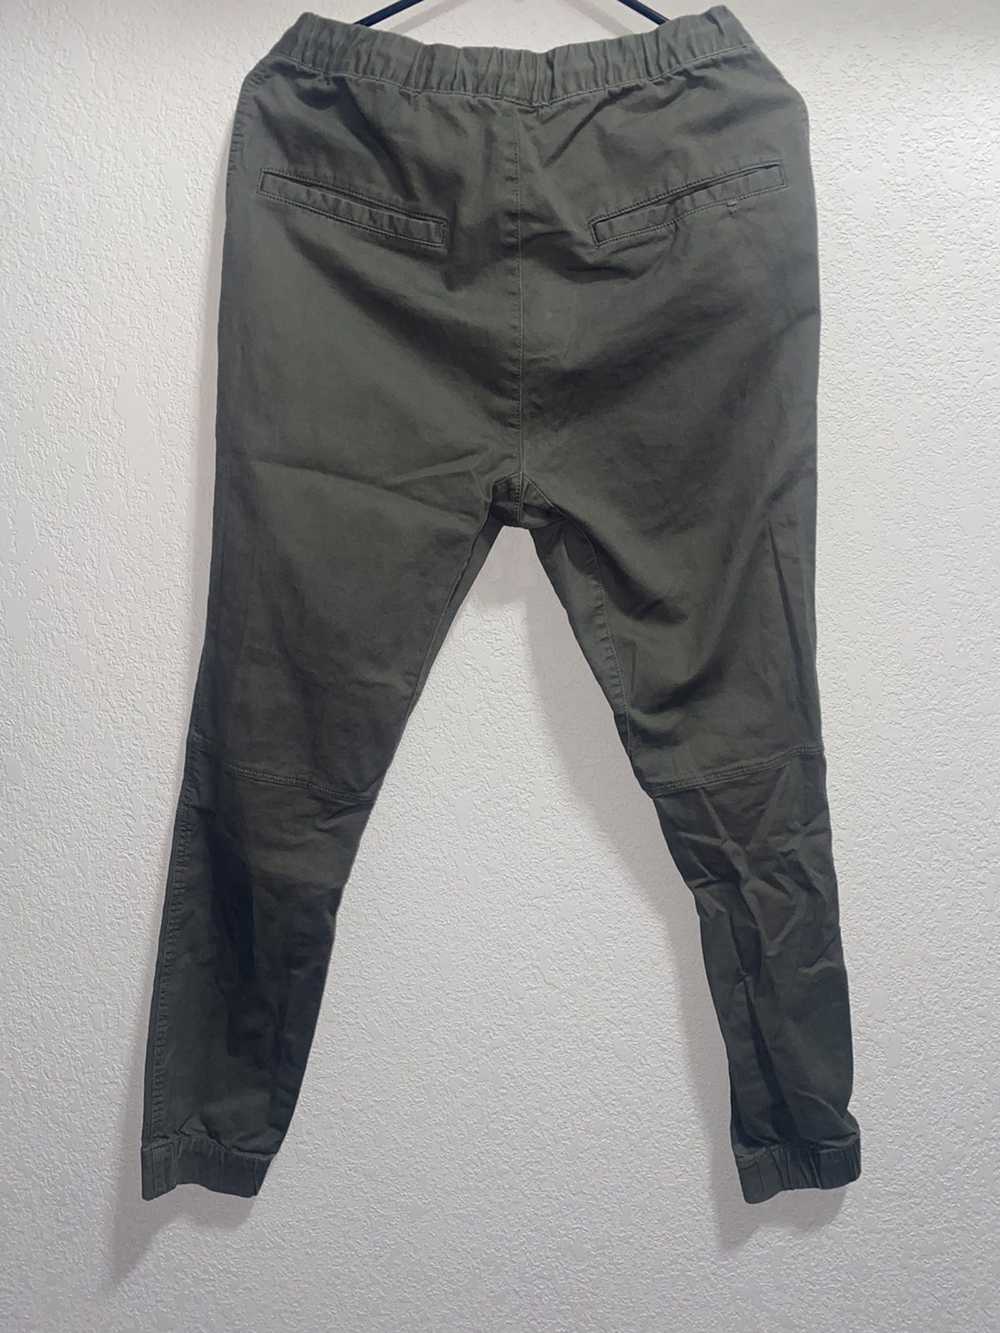 Divided × H&M Causal Pants by H&M Divided - image 2